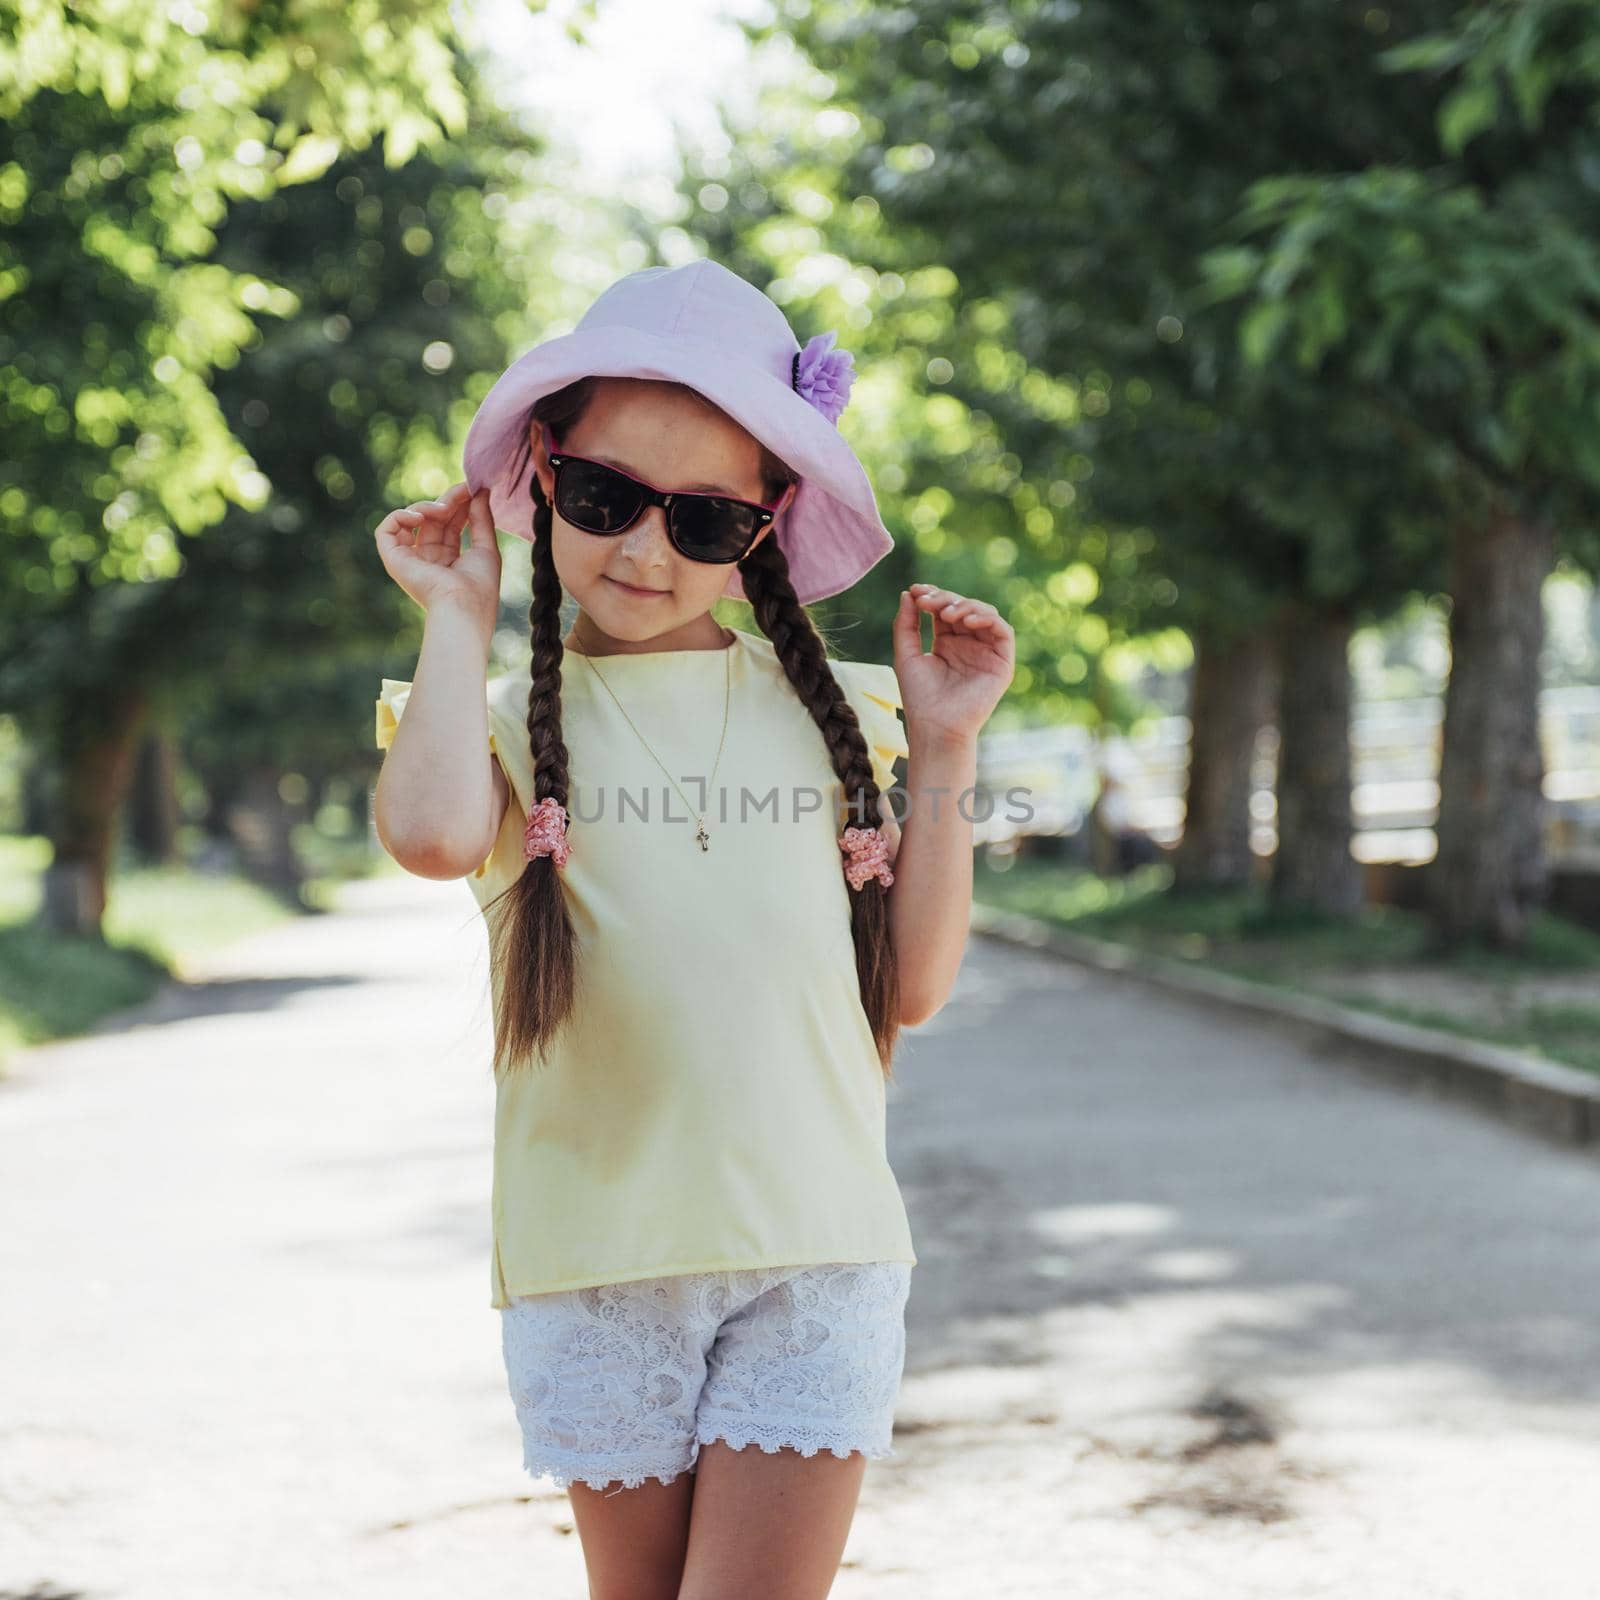 Beautiful girl in a summer sunny day by Standret